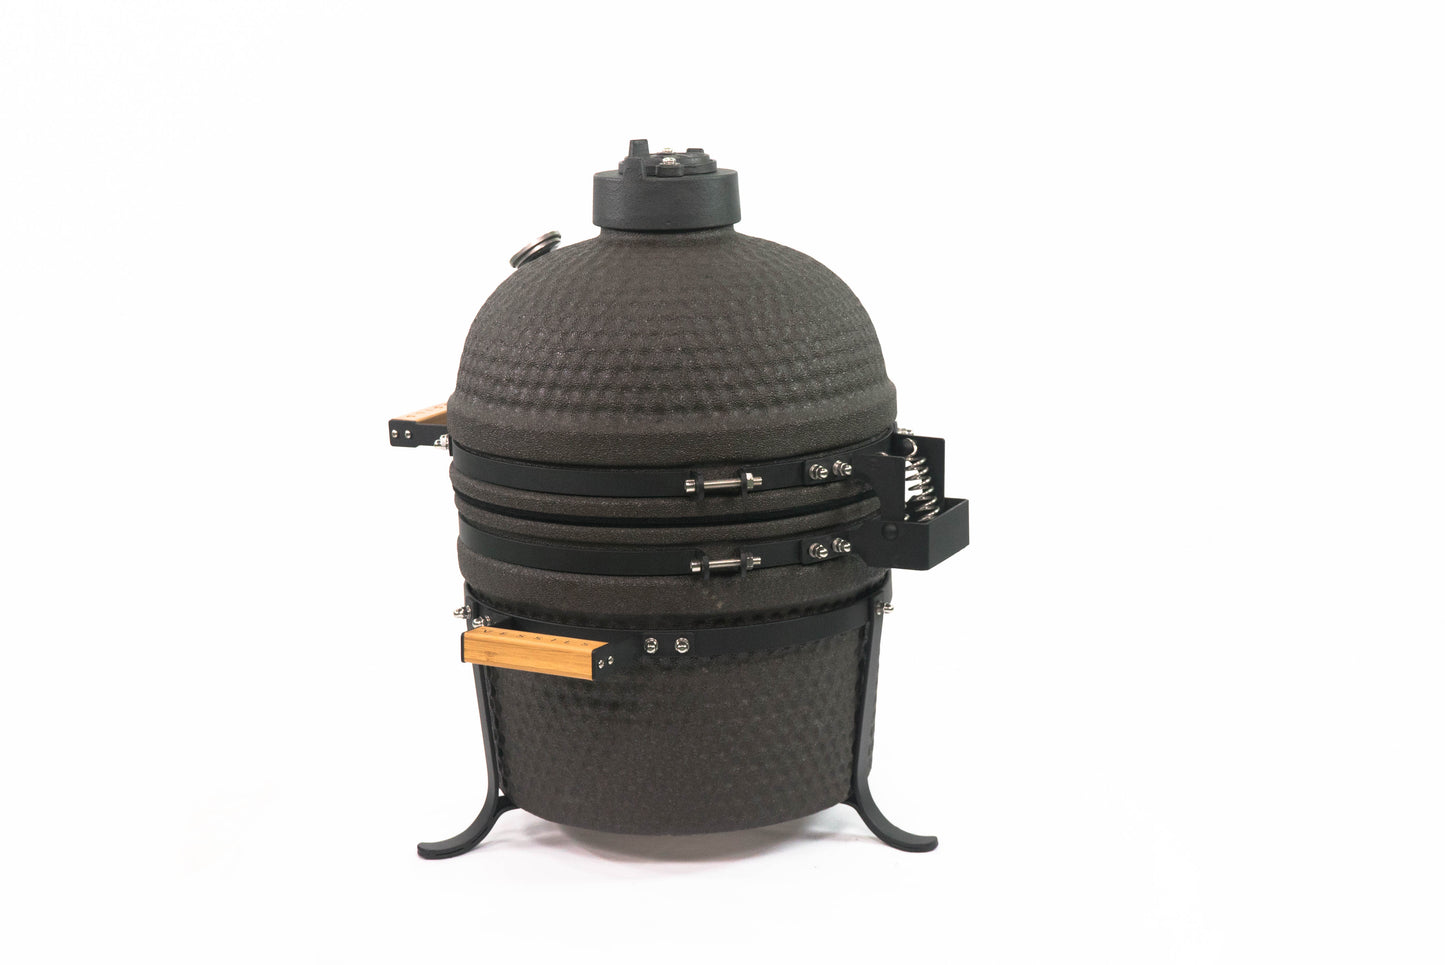 15 Inch Mini Kamado Grill Garden Ceramic Grills BBQ Smoker without Side Table-Matte black